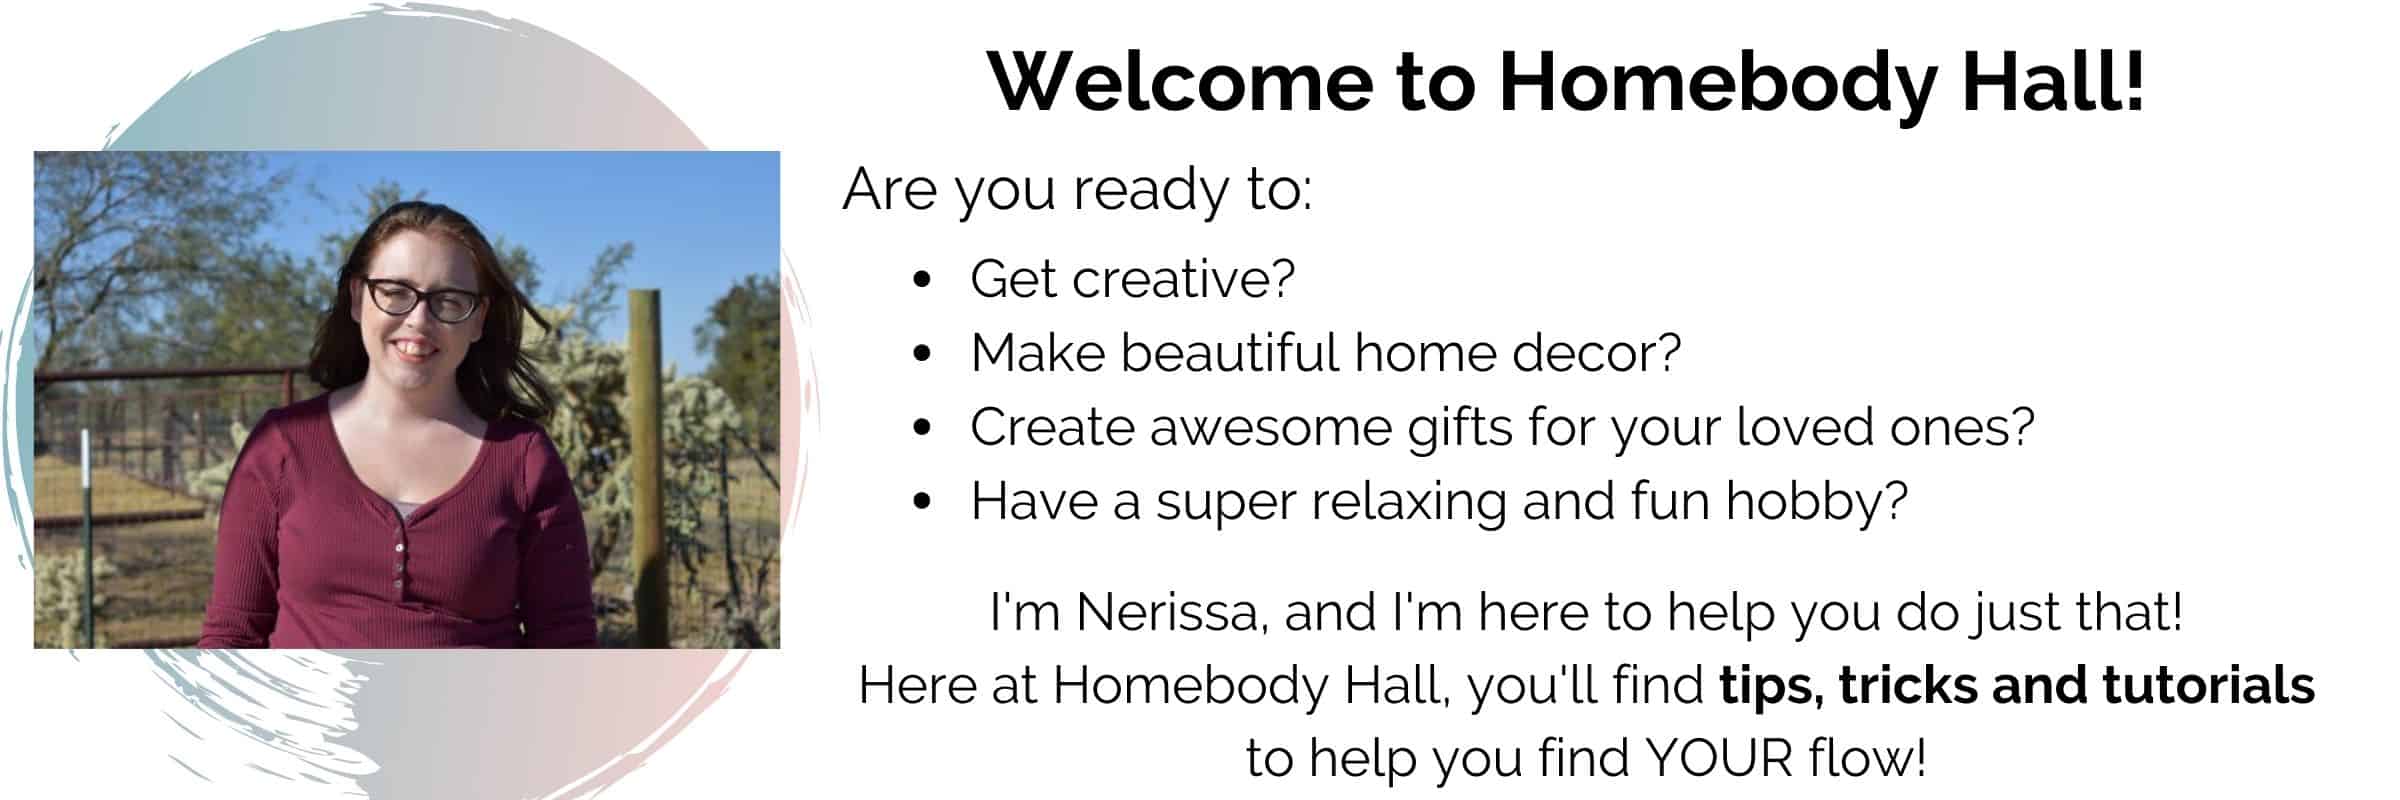 Welcome to Homebody Hall! (1)